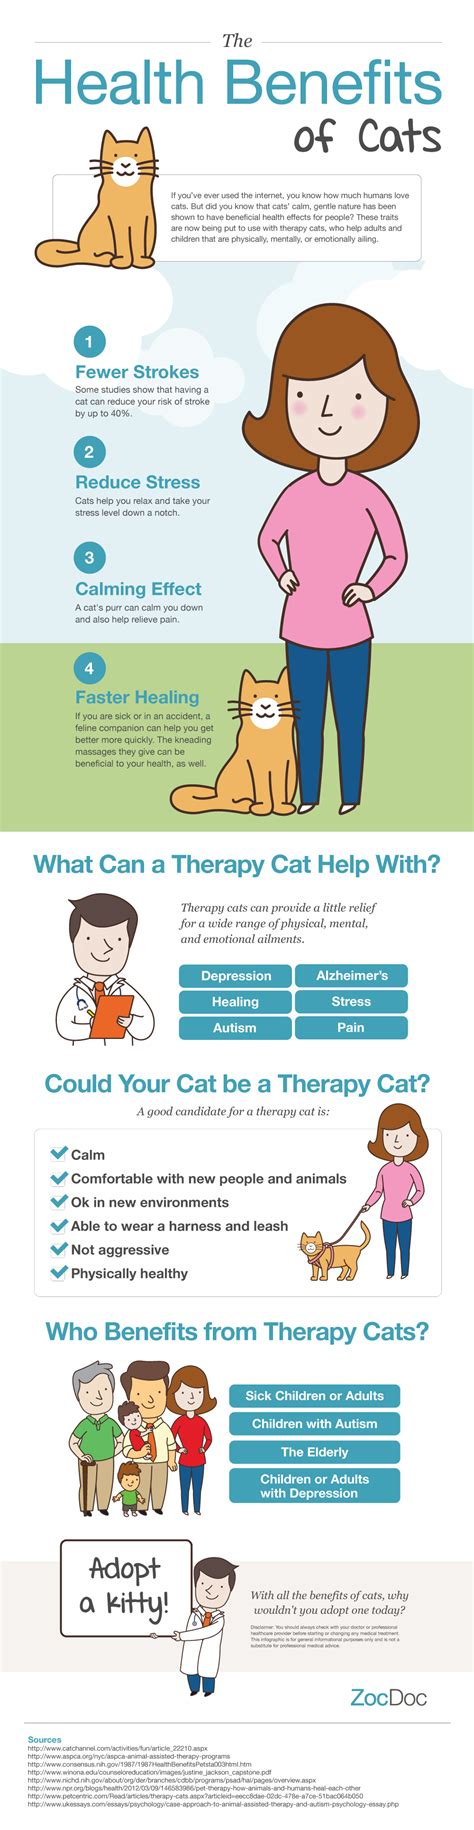 Health Benefits Of Cats The Zocdoc Blog Therapy Cat Cat Care Cat